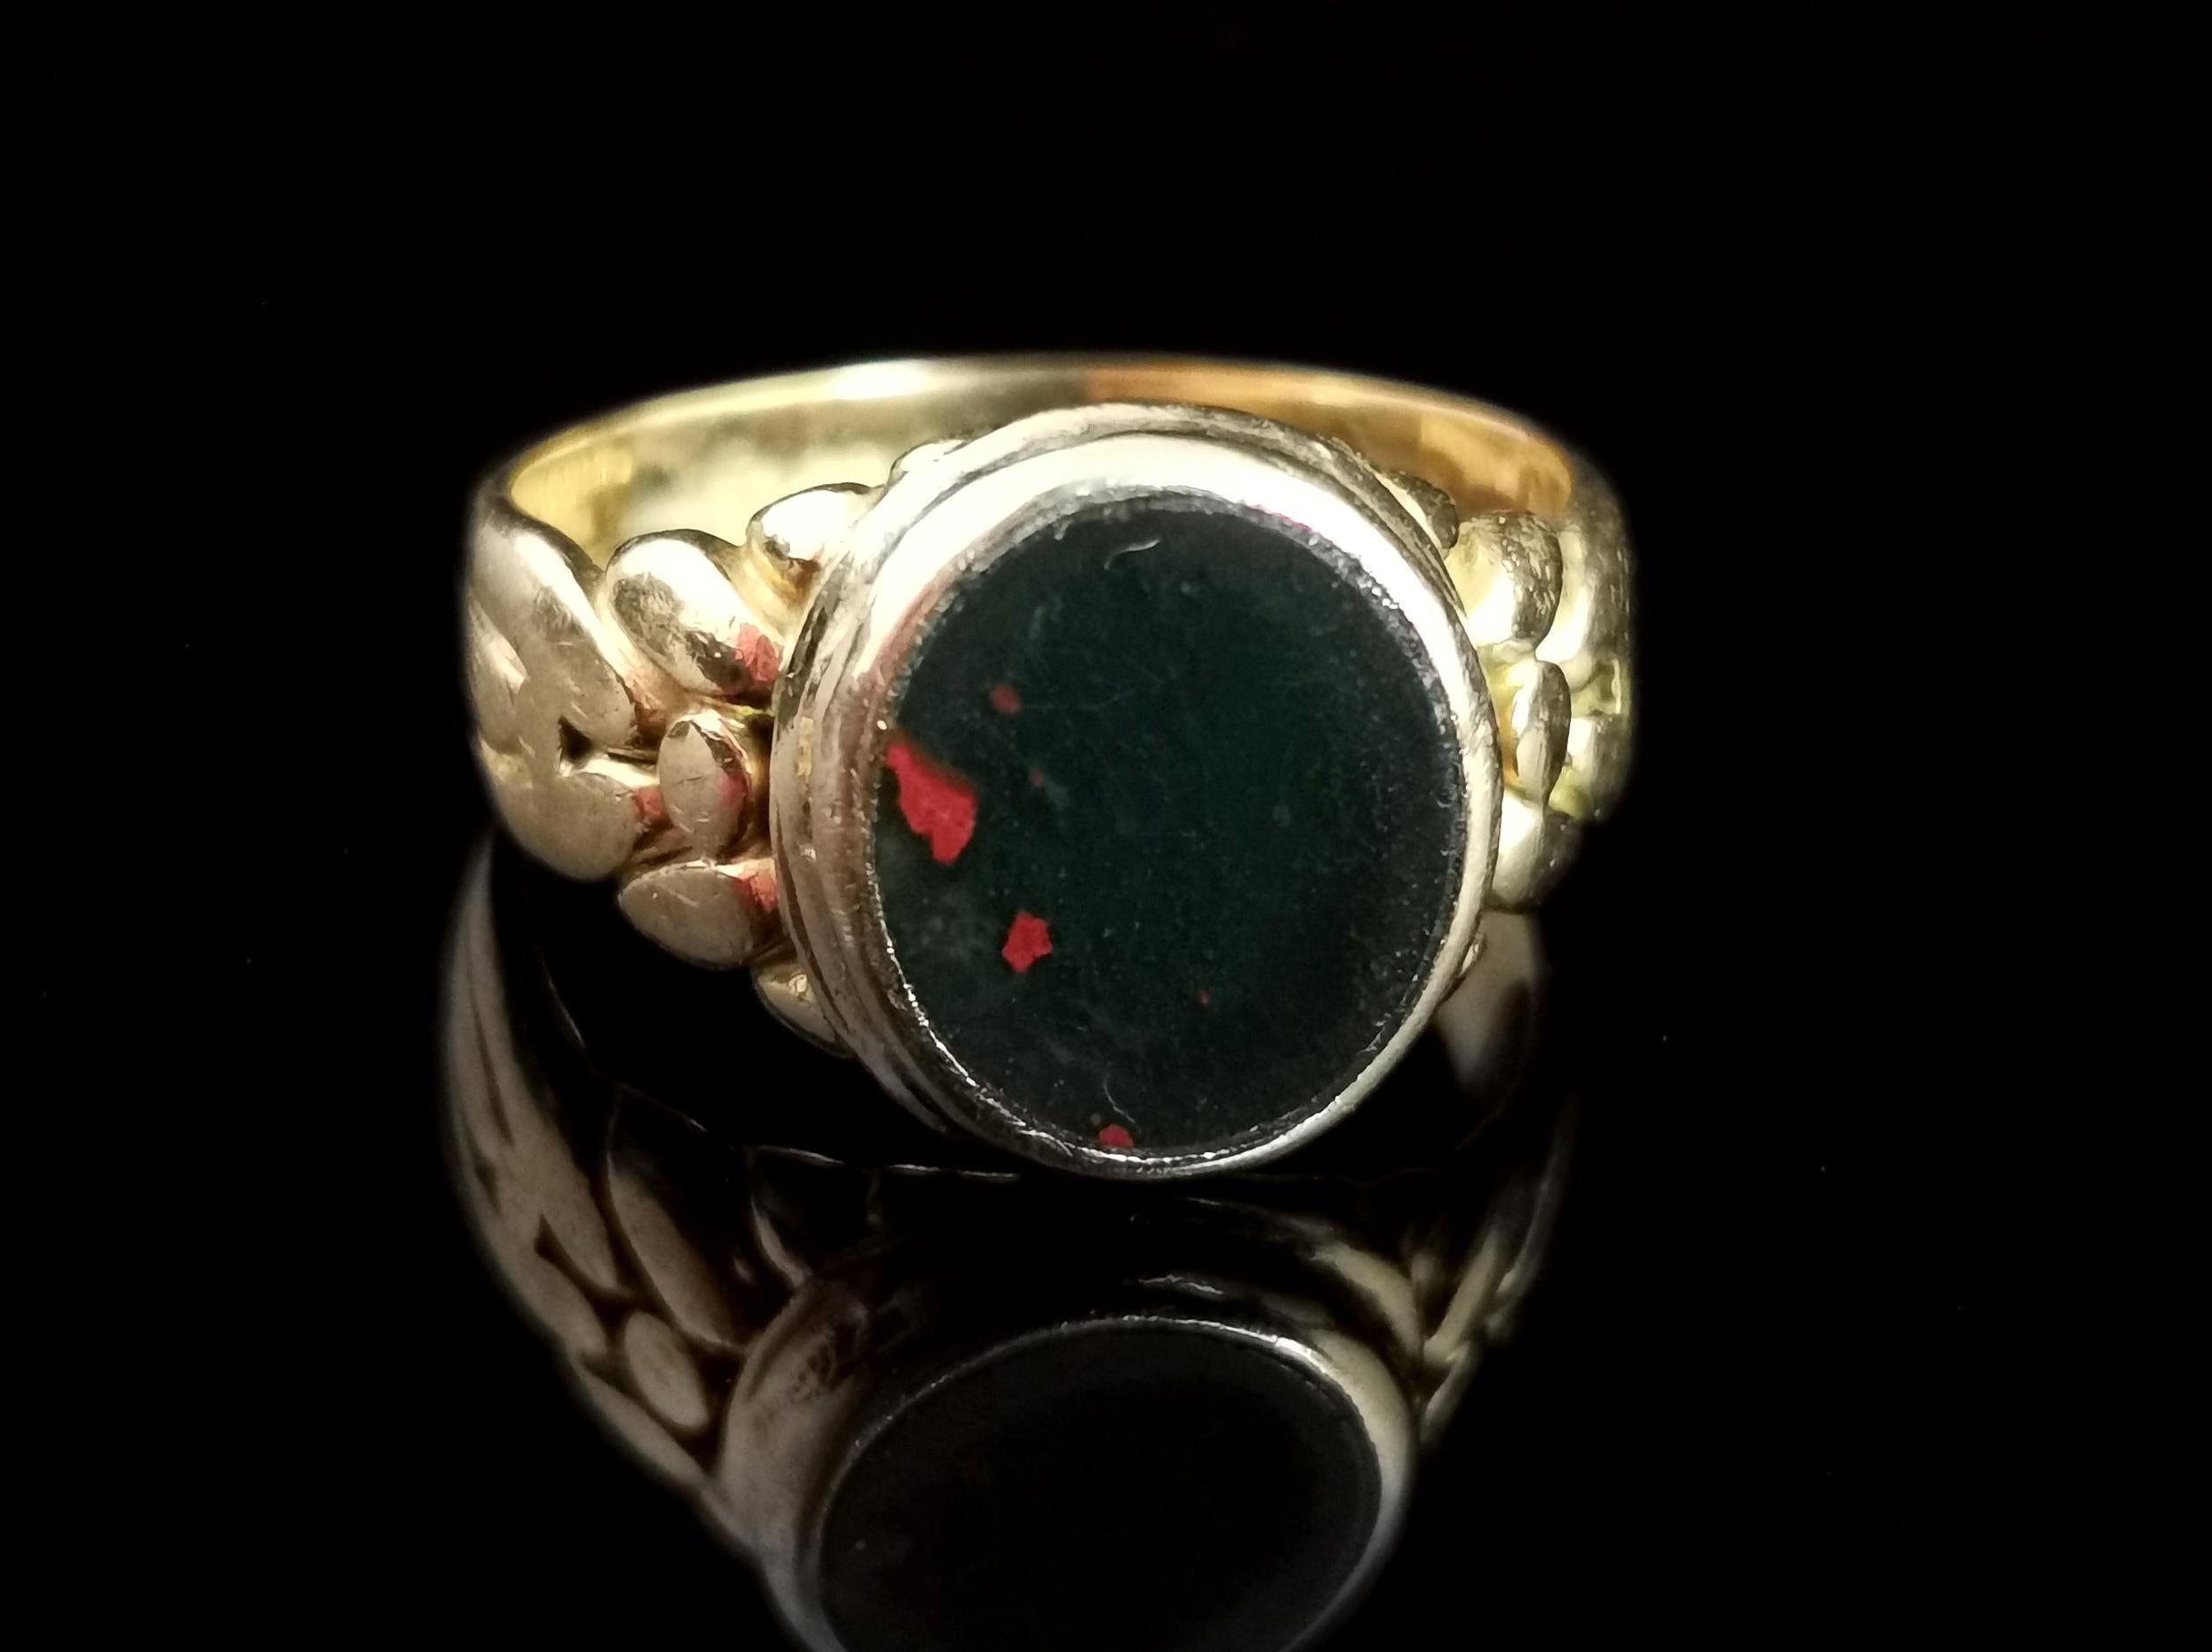 A gorgeous antique, Edwardian era 18 karat gold and bloodstone signet or seal ring.

This gorgeous ring has an unusual design in that the shoulders are styled in a similar way to a keeper ring, nice and chunky the bear way to a round bezel set